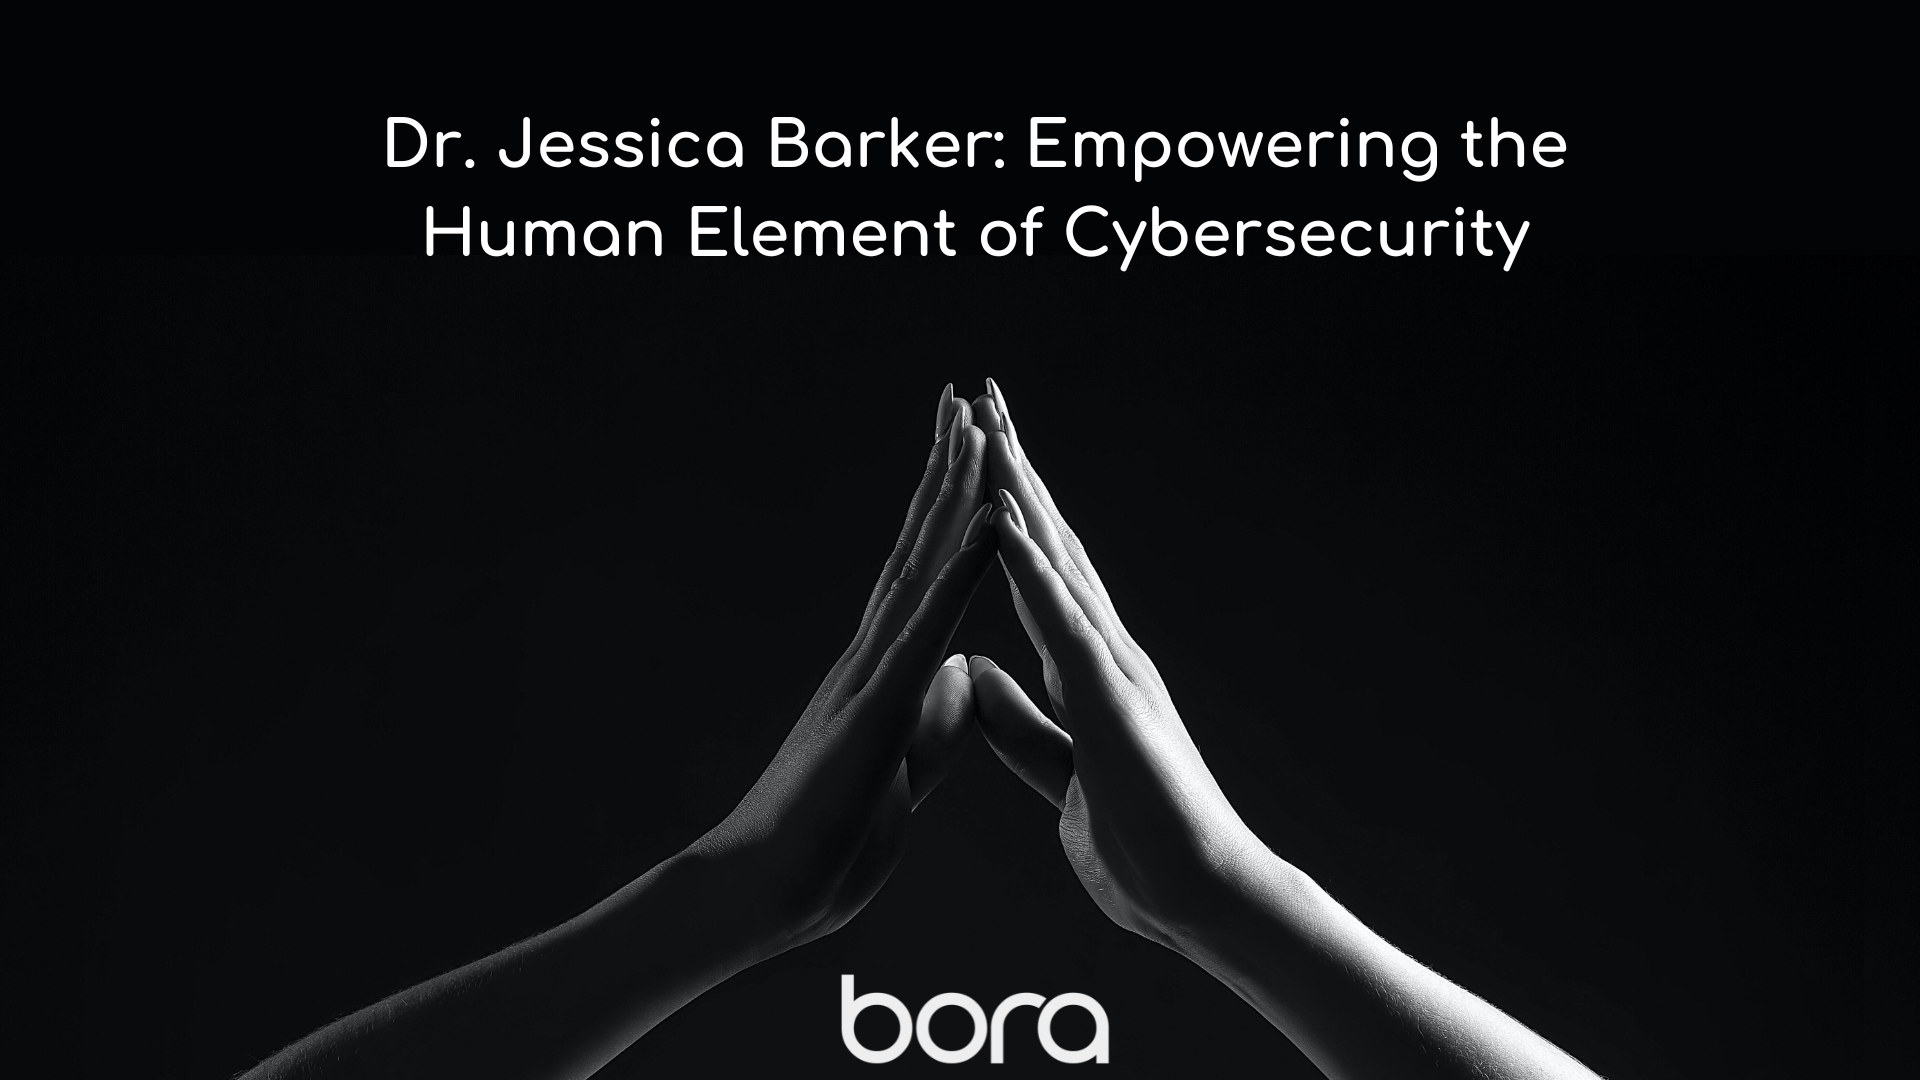 Dr. Jessica Barker: Empowering the Human Element of Cybersecurity